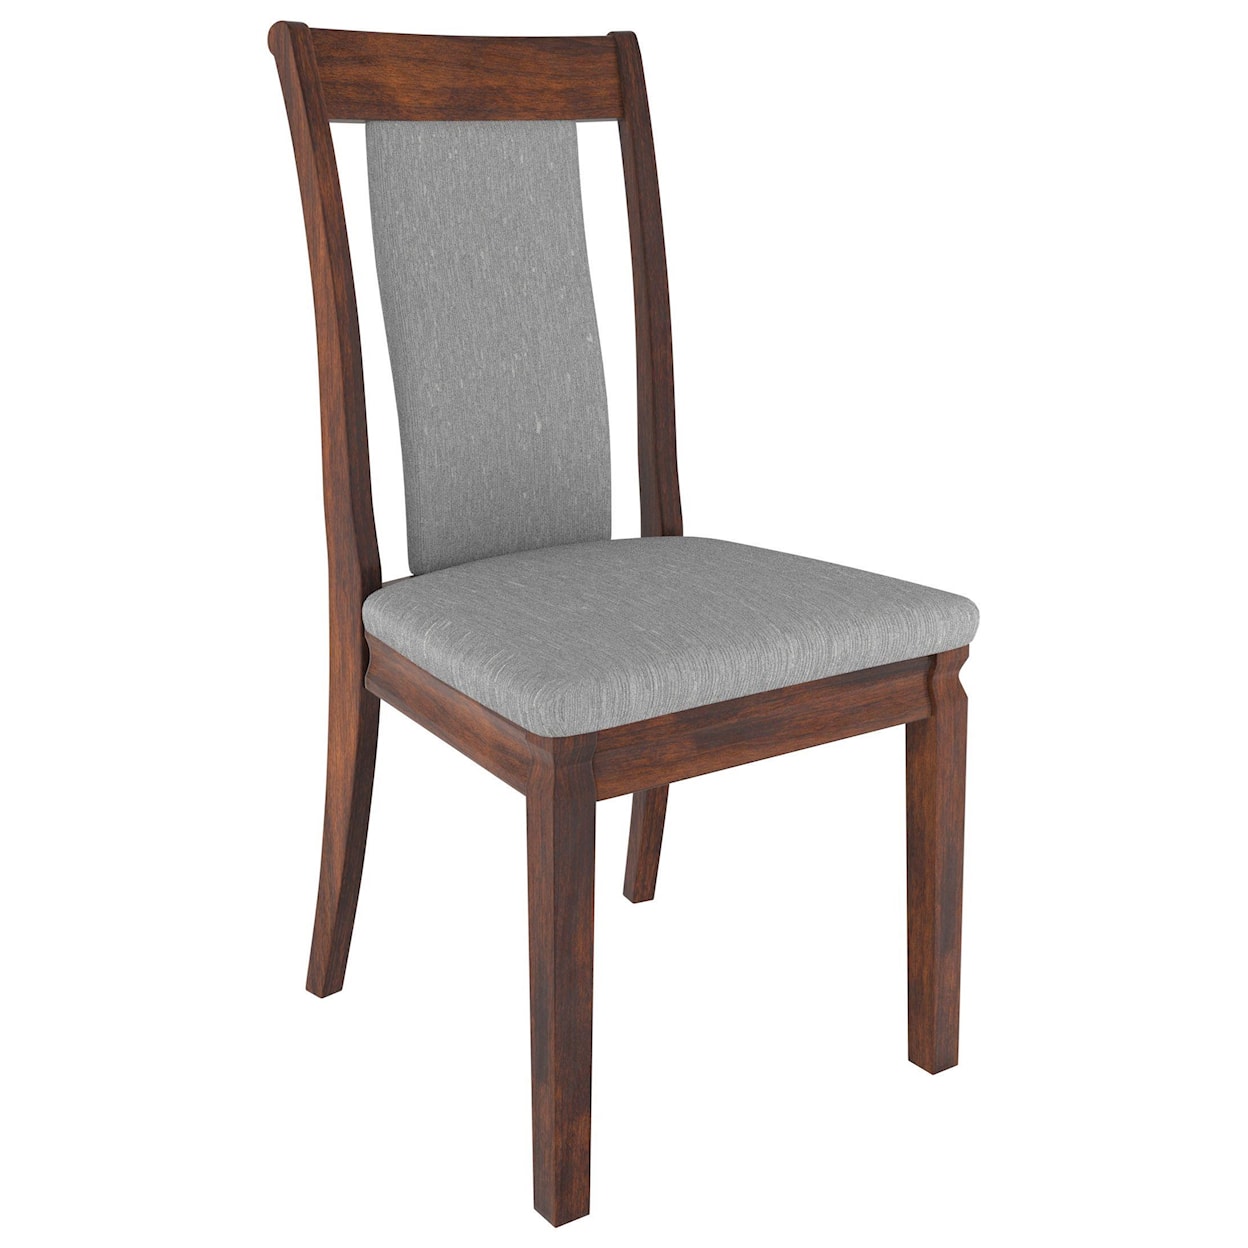 Country Comfort Woodworking Bellville Side Chair